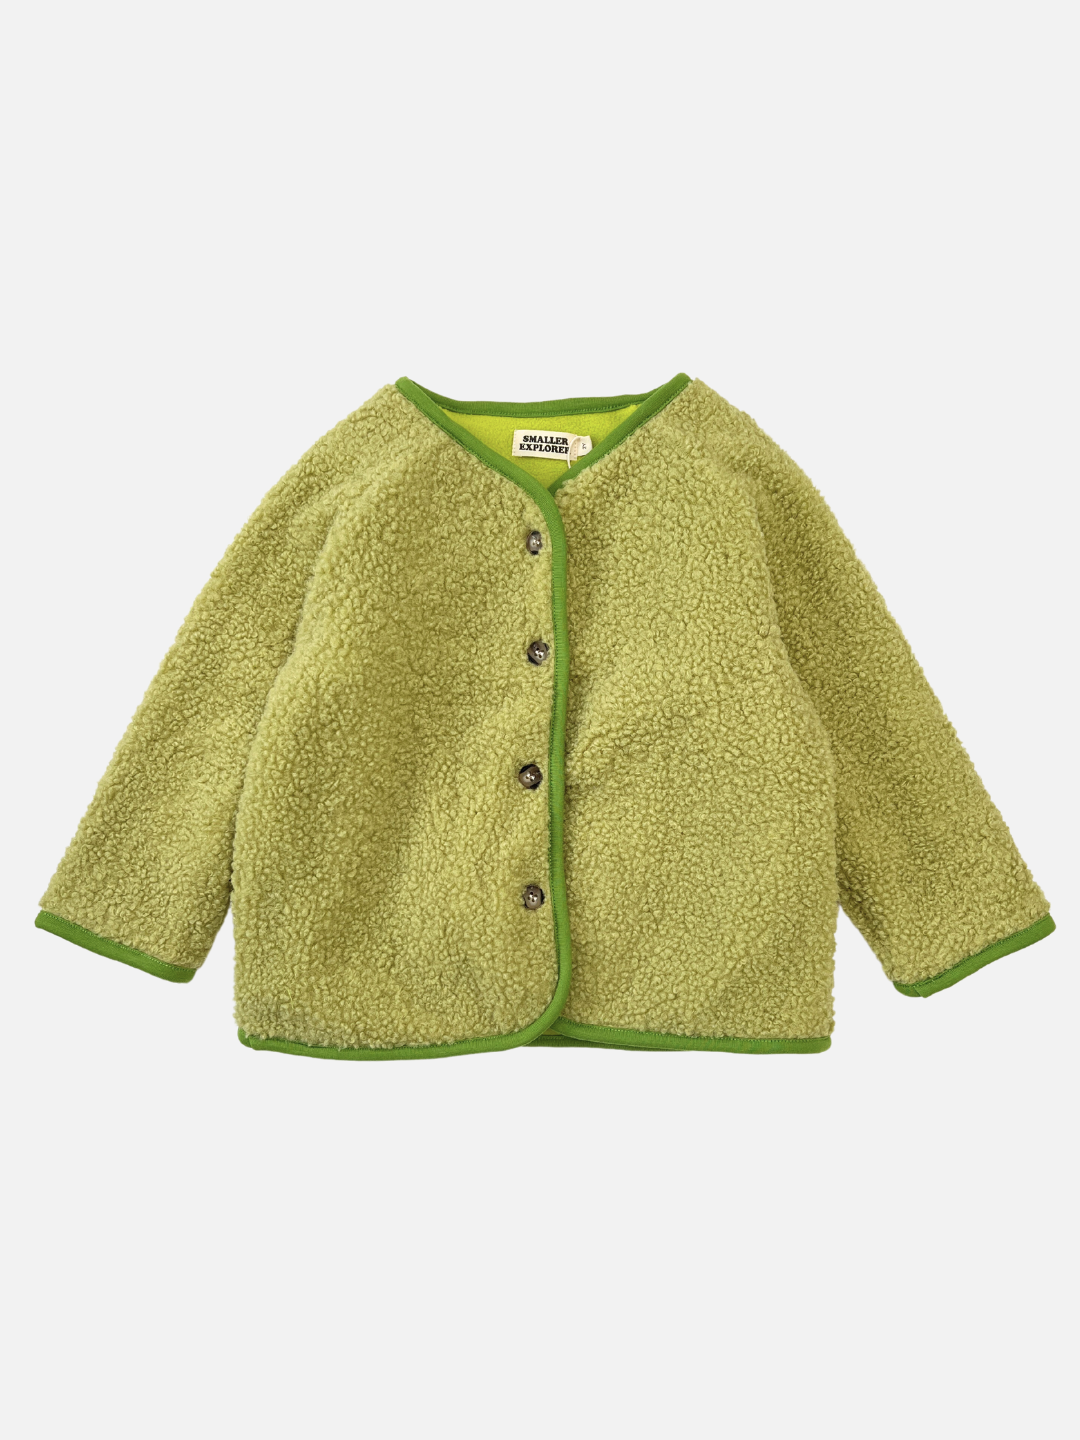 Matcha | Front view of a kids light green collarless fleece jacket with four brown buttons.